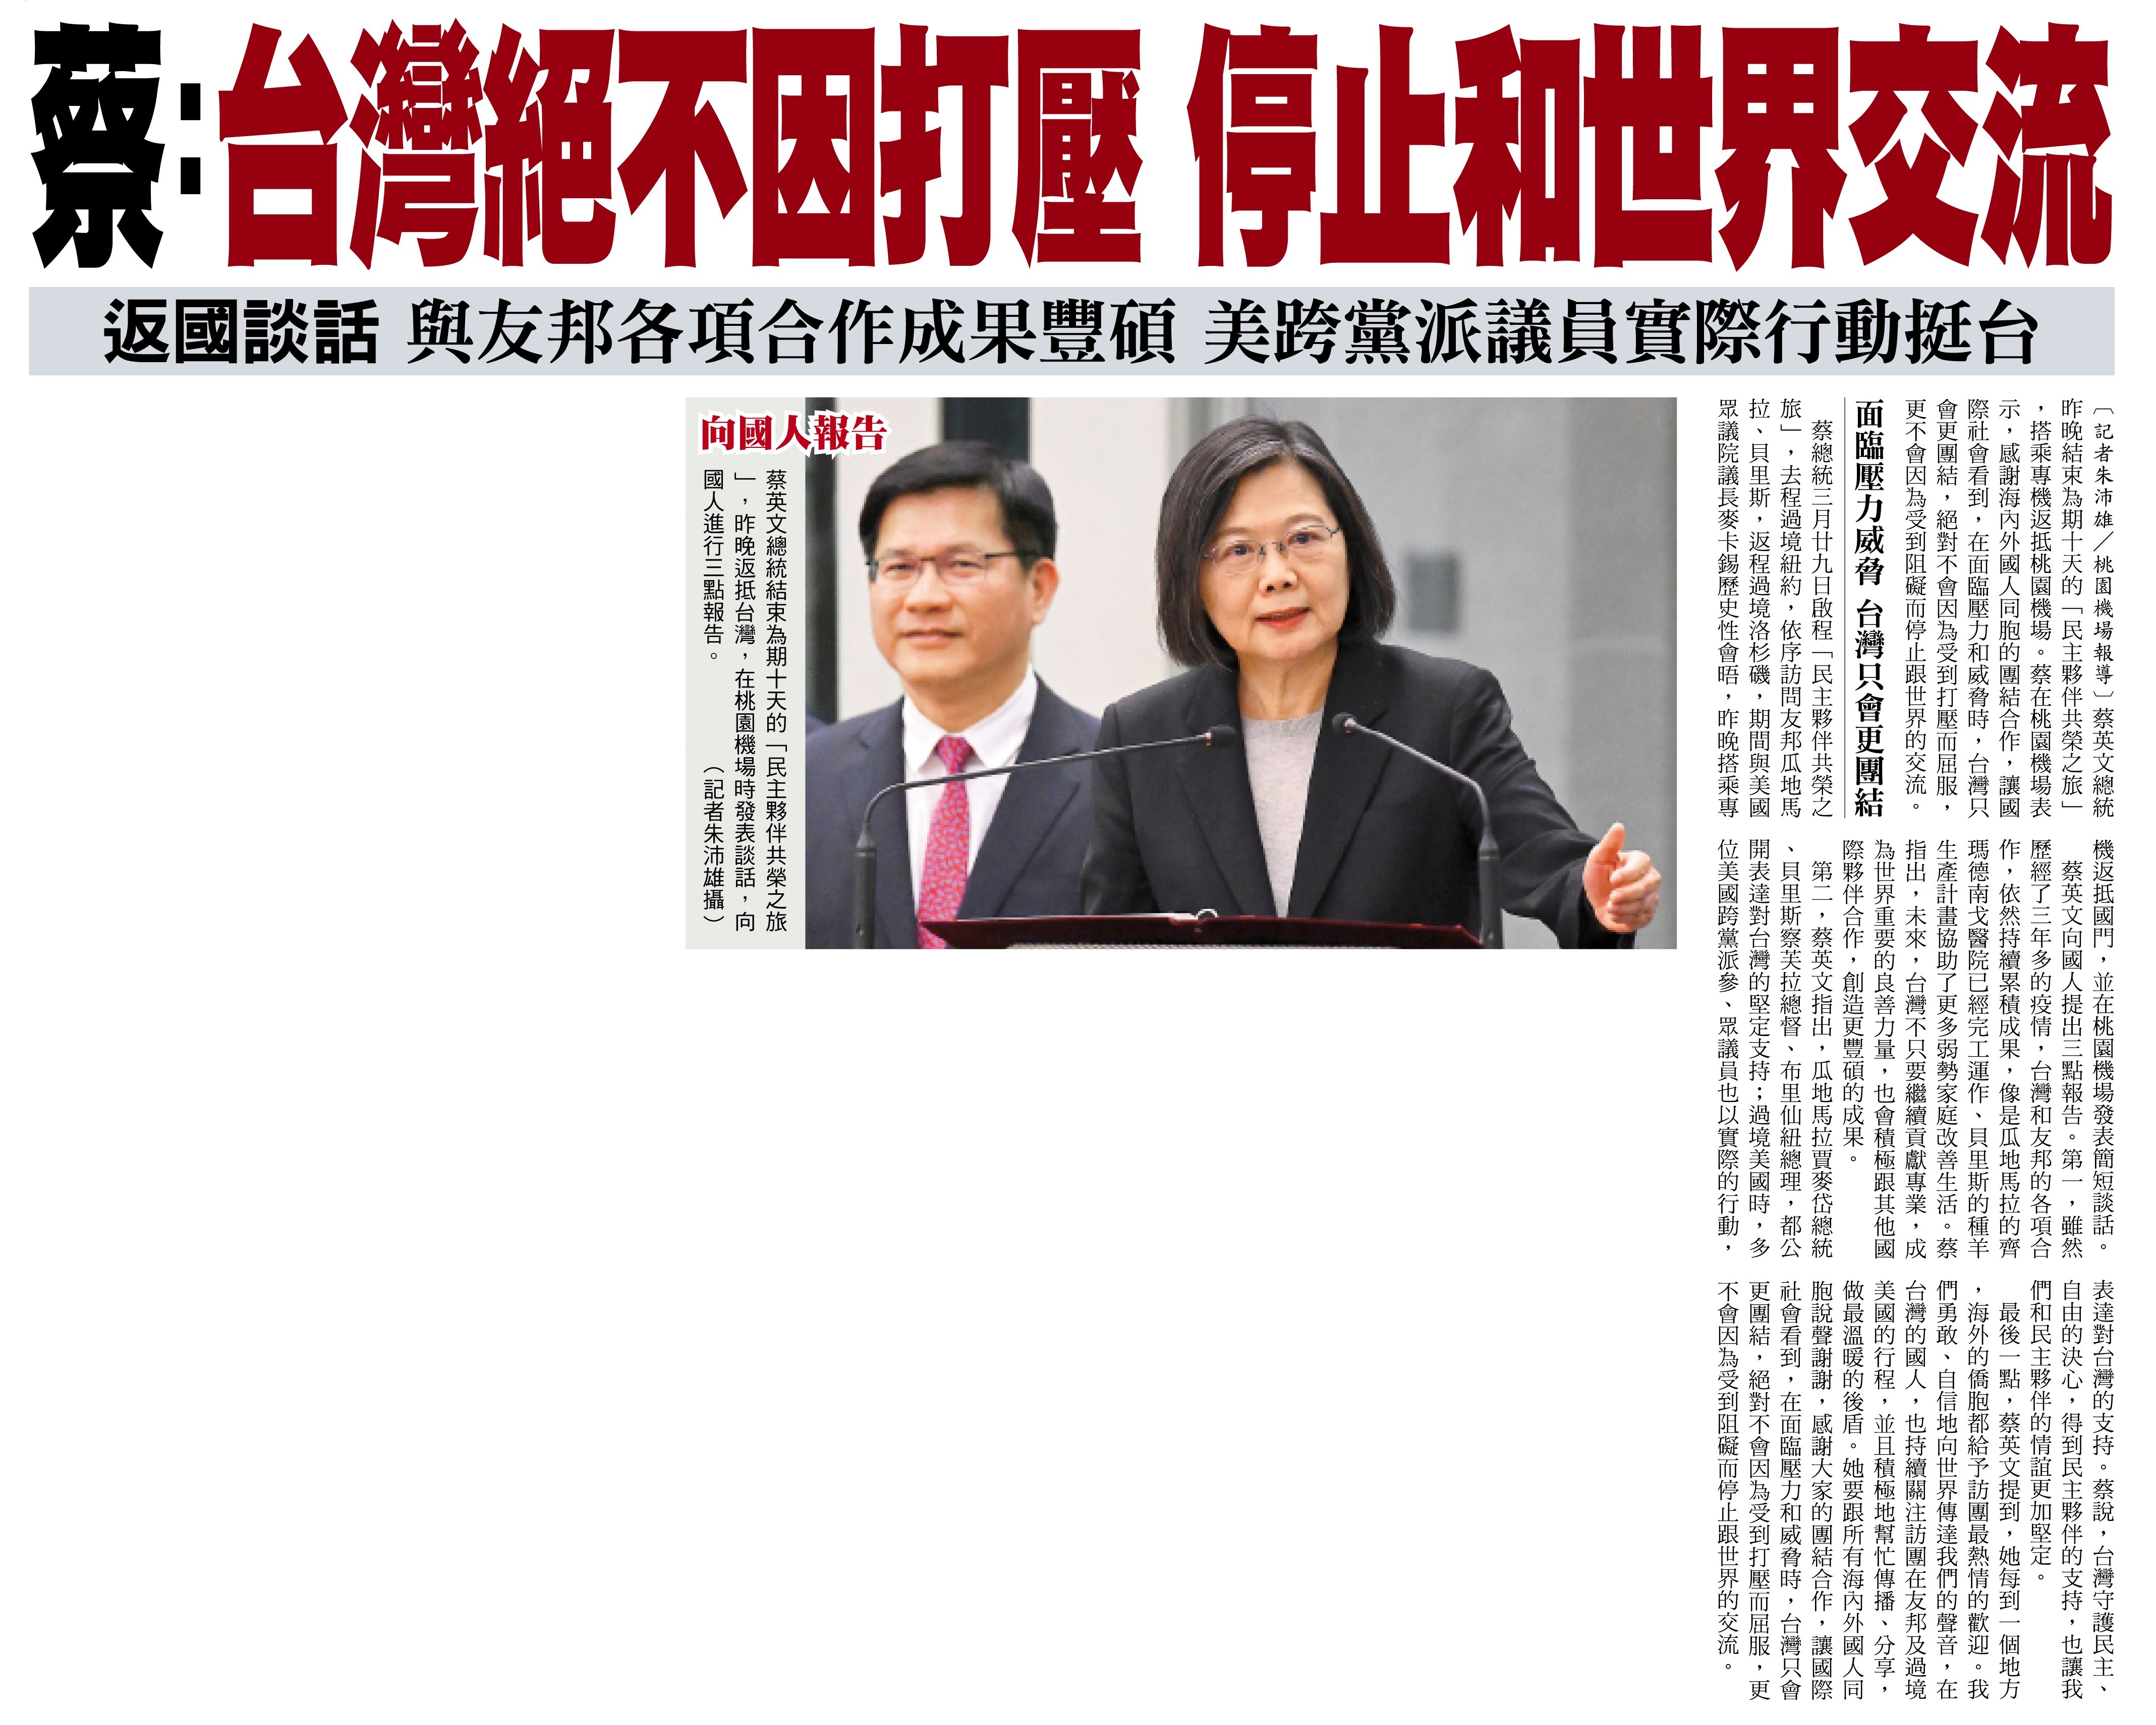 Returning to Taiwan, Tsai says Taiwan will not yield to pressure nor stop engaging with the world, cooperation with allies achieving results, US Congress members taking action to support Taiwan